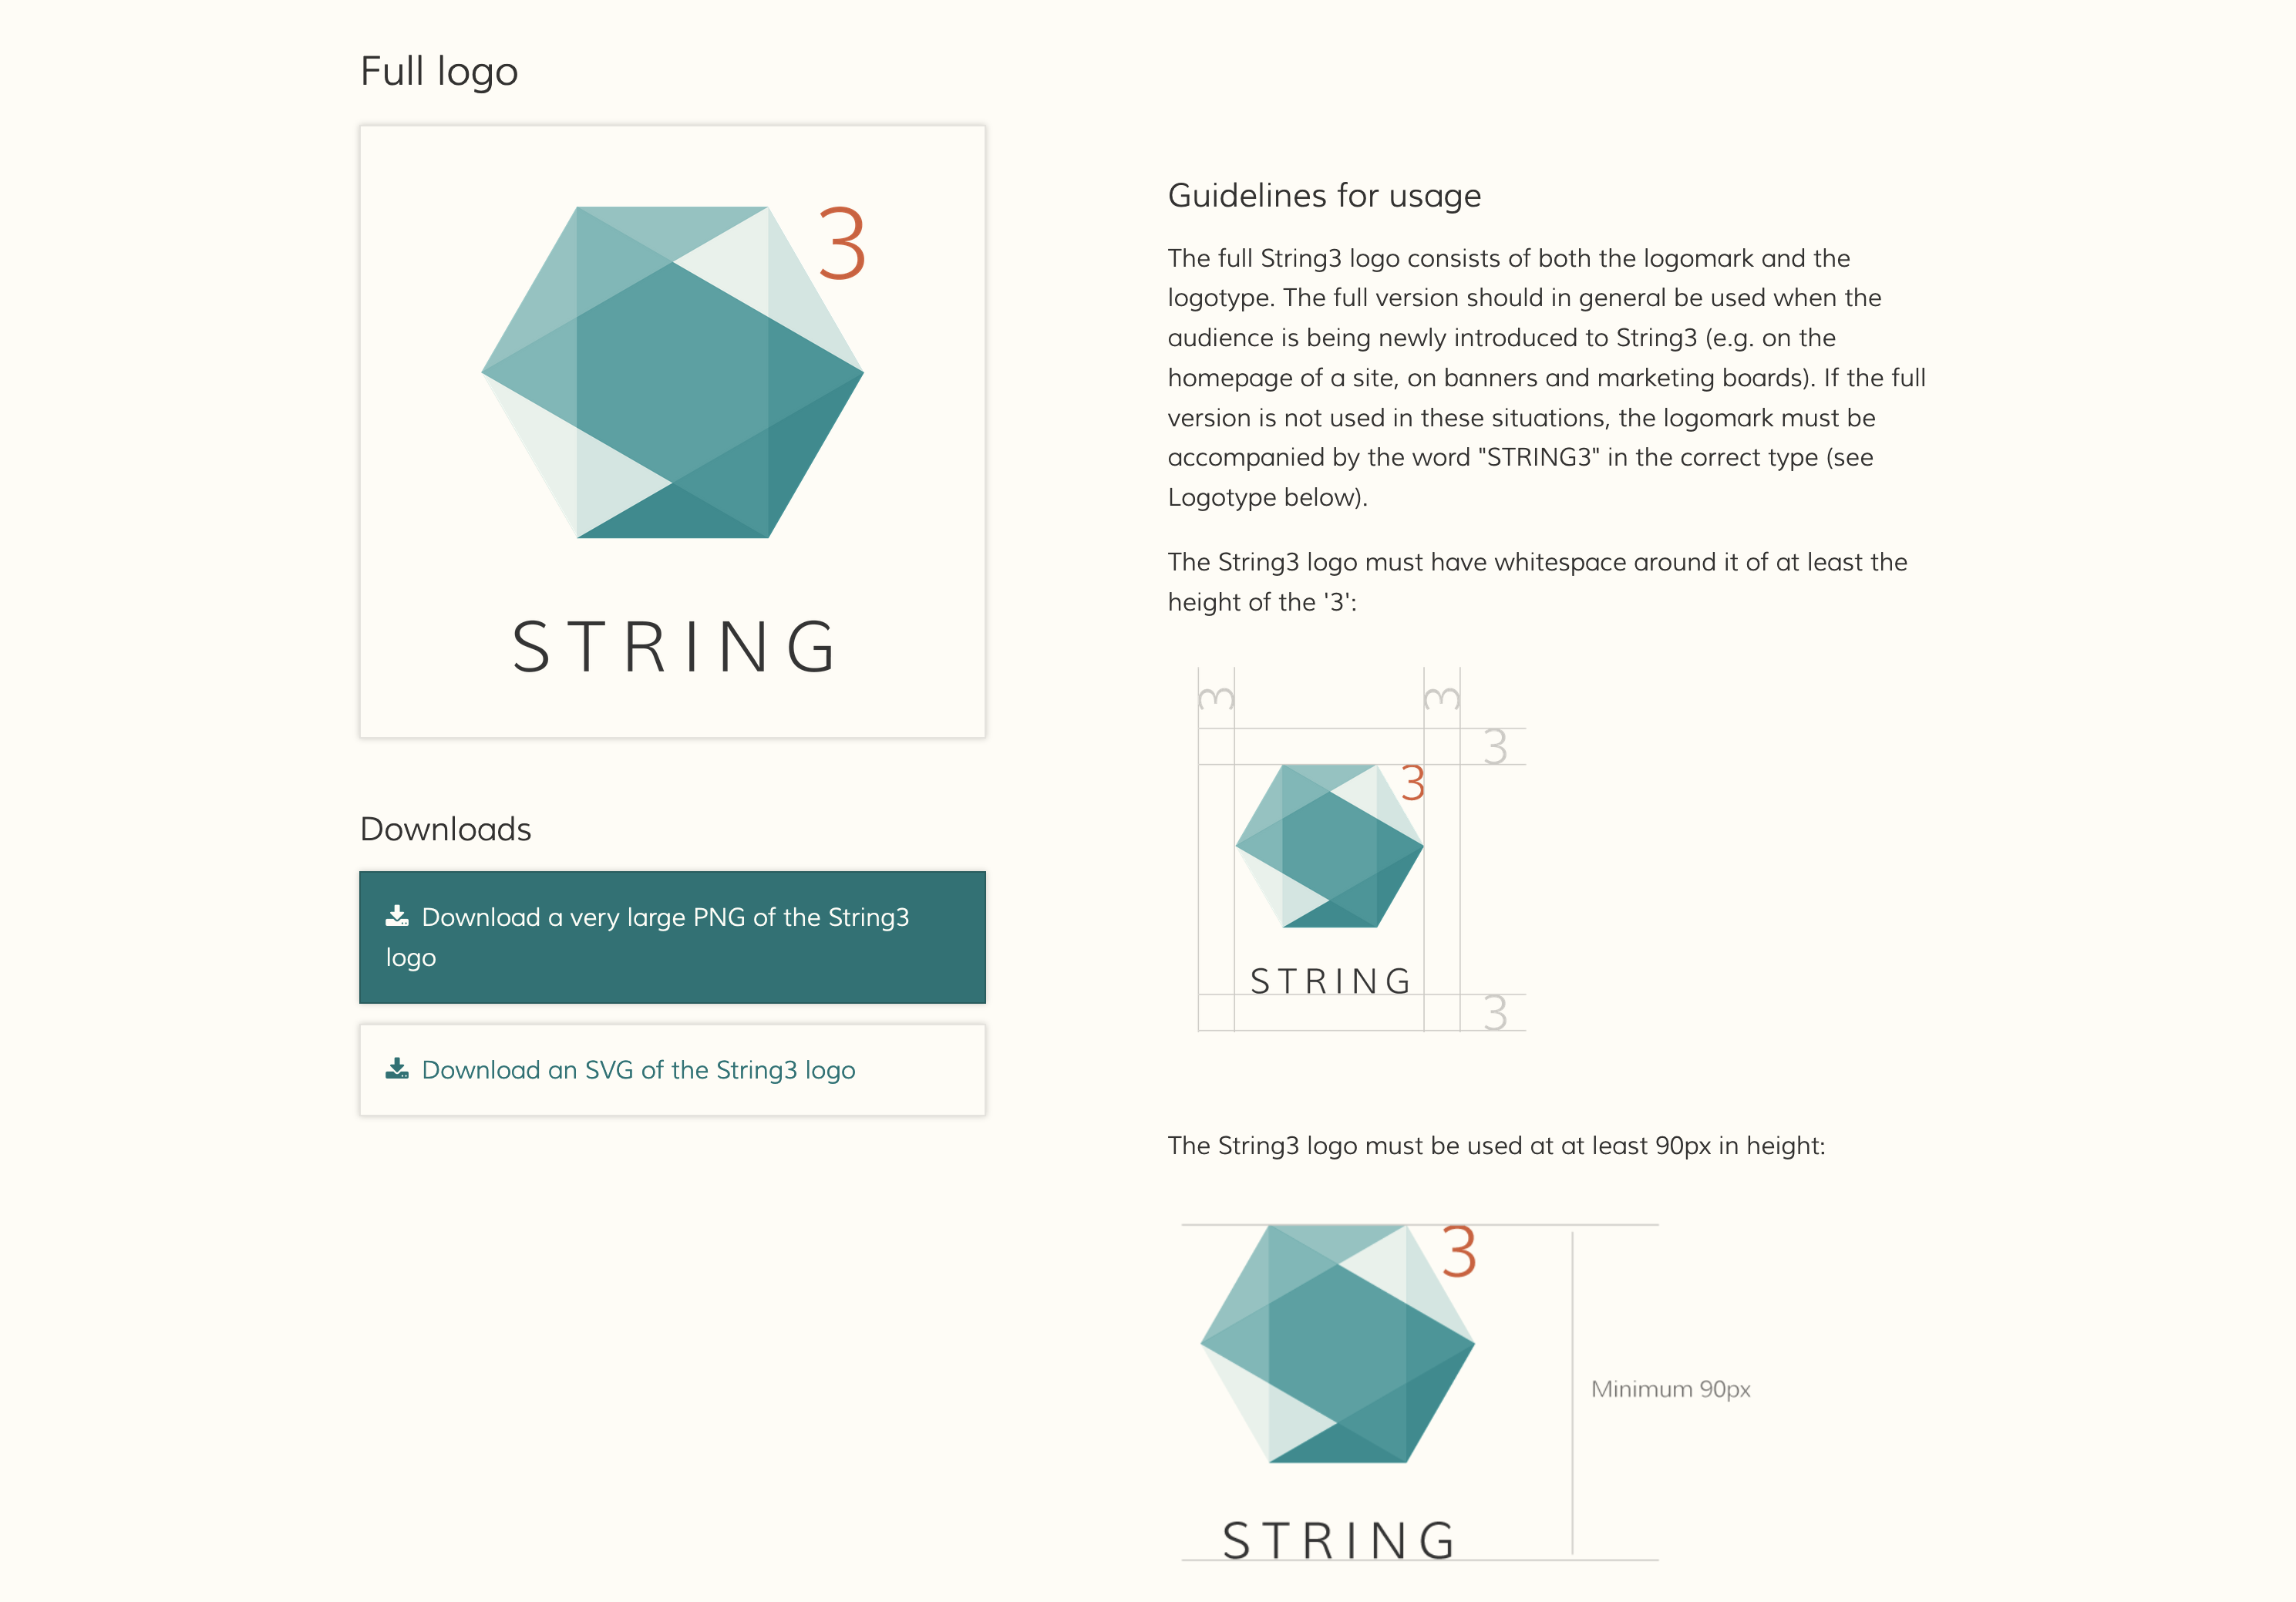 Screenshot showing usage guidelines for the String3 logo